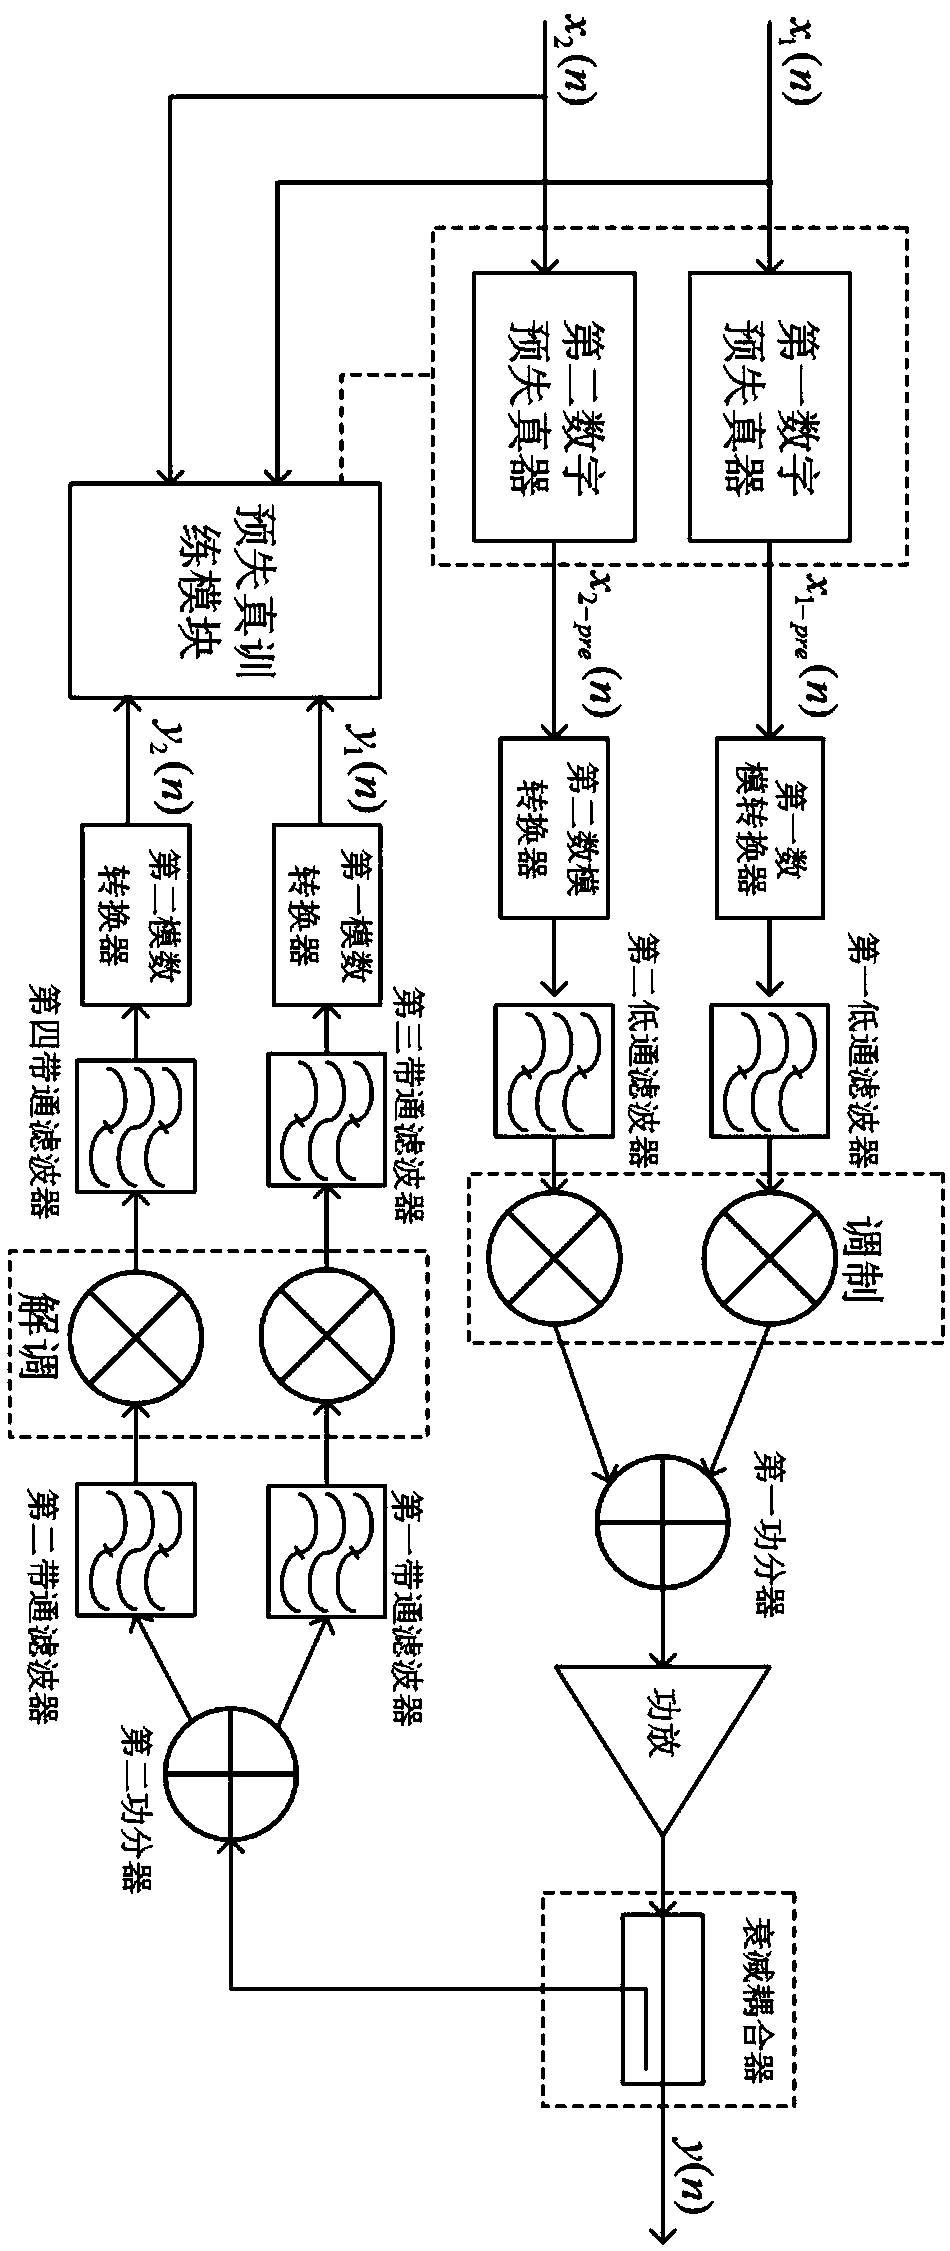 Double-frequency power amplifier digital predistortion device and method based on piecewise linear function